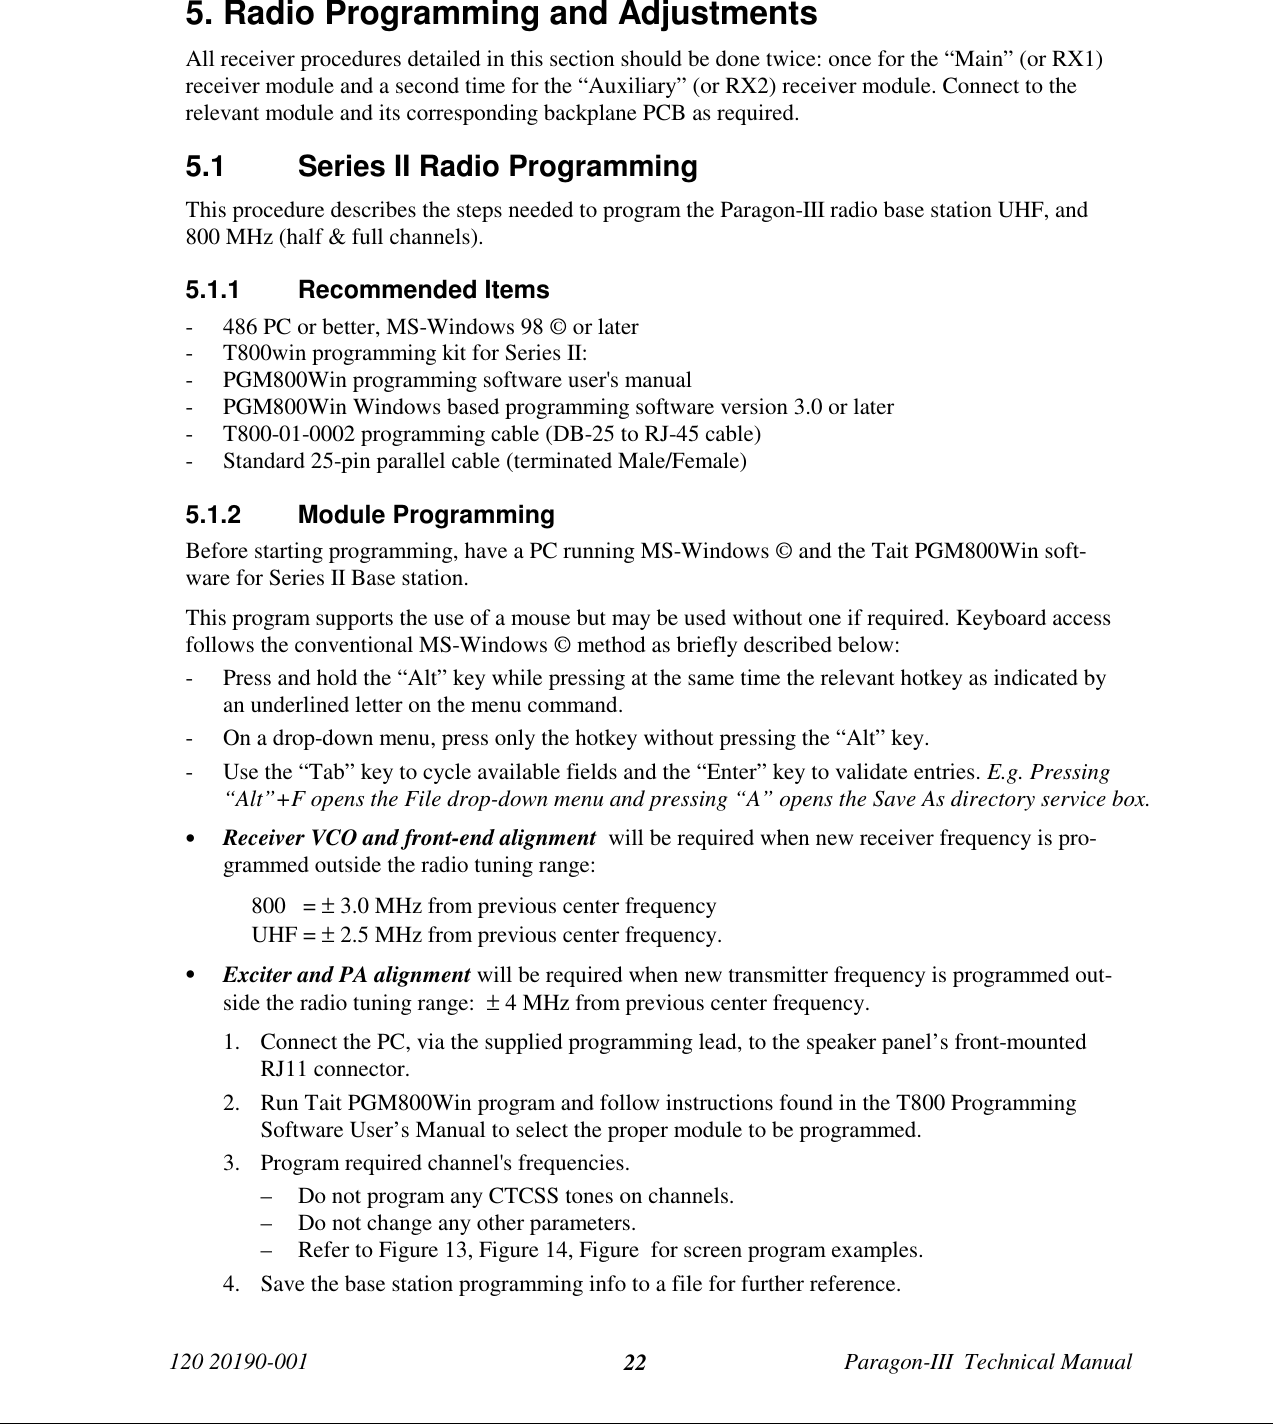 120 20190-001 Paragon-III  Technical Manual225. Radio Programming and AdjustmentsAll receiver procedures detailed in this section should be done twice: once for the “Main” (or RX1)receiver module and a second time for the “Auxiliary” (or RX2) receiver module. Connect to therelevant module and its corresponding backplane PCB as required.5.1  Series II Radio ProgrammingThis procedure describes the steps needed to program the Paragon-III radio base station UHF, and800 MHz (half &amp; full channels).5.1.1 Recommended Items- 486 PC or better, MS-Windows 98 © or later- T800win programming kit for Series II:- PGM800Win programming software user&apos;s manual- PGM800Win Windows based programming software version 3.0 or later- T800-01-0002 programming cable (DB-25 to RJ-45 cable)- Standard 25-pin parallel cable (terminated Male/Female)5.1.2 Module ProgrammingBefore starting programming, have a PC running MS-Windows © and the Tait PGM800Win soft-ware for Series II Base station.This program supports the use of a mouse but may be used without one if required. Keyboard accessfollows the conventional MS-Windows © method as briefly described below:- Press and hold the “Alt” key while pressing at the same time the relevant hotkey as indicated byan underlined letter on the menu command.- On a drop-down menu, press only the hotkey without pressing the “Alt” key.- Use the “Tab” key to cycle available fields and the “Enter” key to validate entries. E.g. Pressing“Alt”+F opens the File drop-down menu and pressing “A” opens the Save As directory service box.• Receiver VCO and front-end alignment  will be required when new receiver frequency is pro-grammed outside the radio tuning range:800   = ± 3.0 MHz from previous center frequencyUHF = ± 2.5 MHz from previous center frequency.• Exciter and PA alignment will be required when new transmitter frequency is programmed out-side the radio tuning range:  ± 4 MHz from previous center frequency.1. Connect the PC, via the supplied programming lead, to the speaker panel’s front-mountedRJ11 connector.2. Run Tait PGM800Win program and follow instructions found in the T800 ProgrammingSoftware User’s Manual to select the proper module to be programmed.3. Program required channel&apos;s frequencies.– Do not program any CTCSS tones on channels.– Do not change any other parameters.– Refer to Figure 13, Figure 14, Figure  for screen program examples.4. Save the base station programming info to a file for further reference.